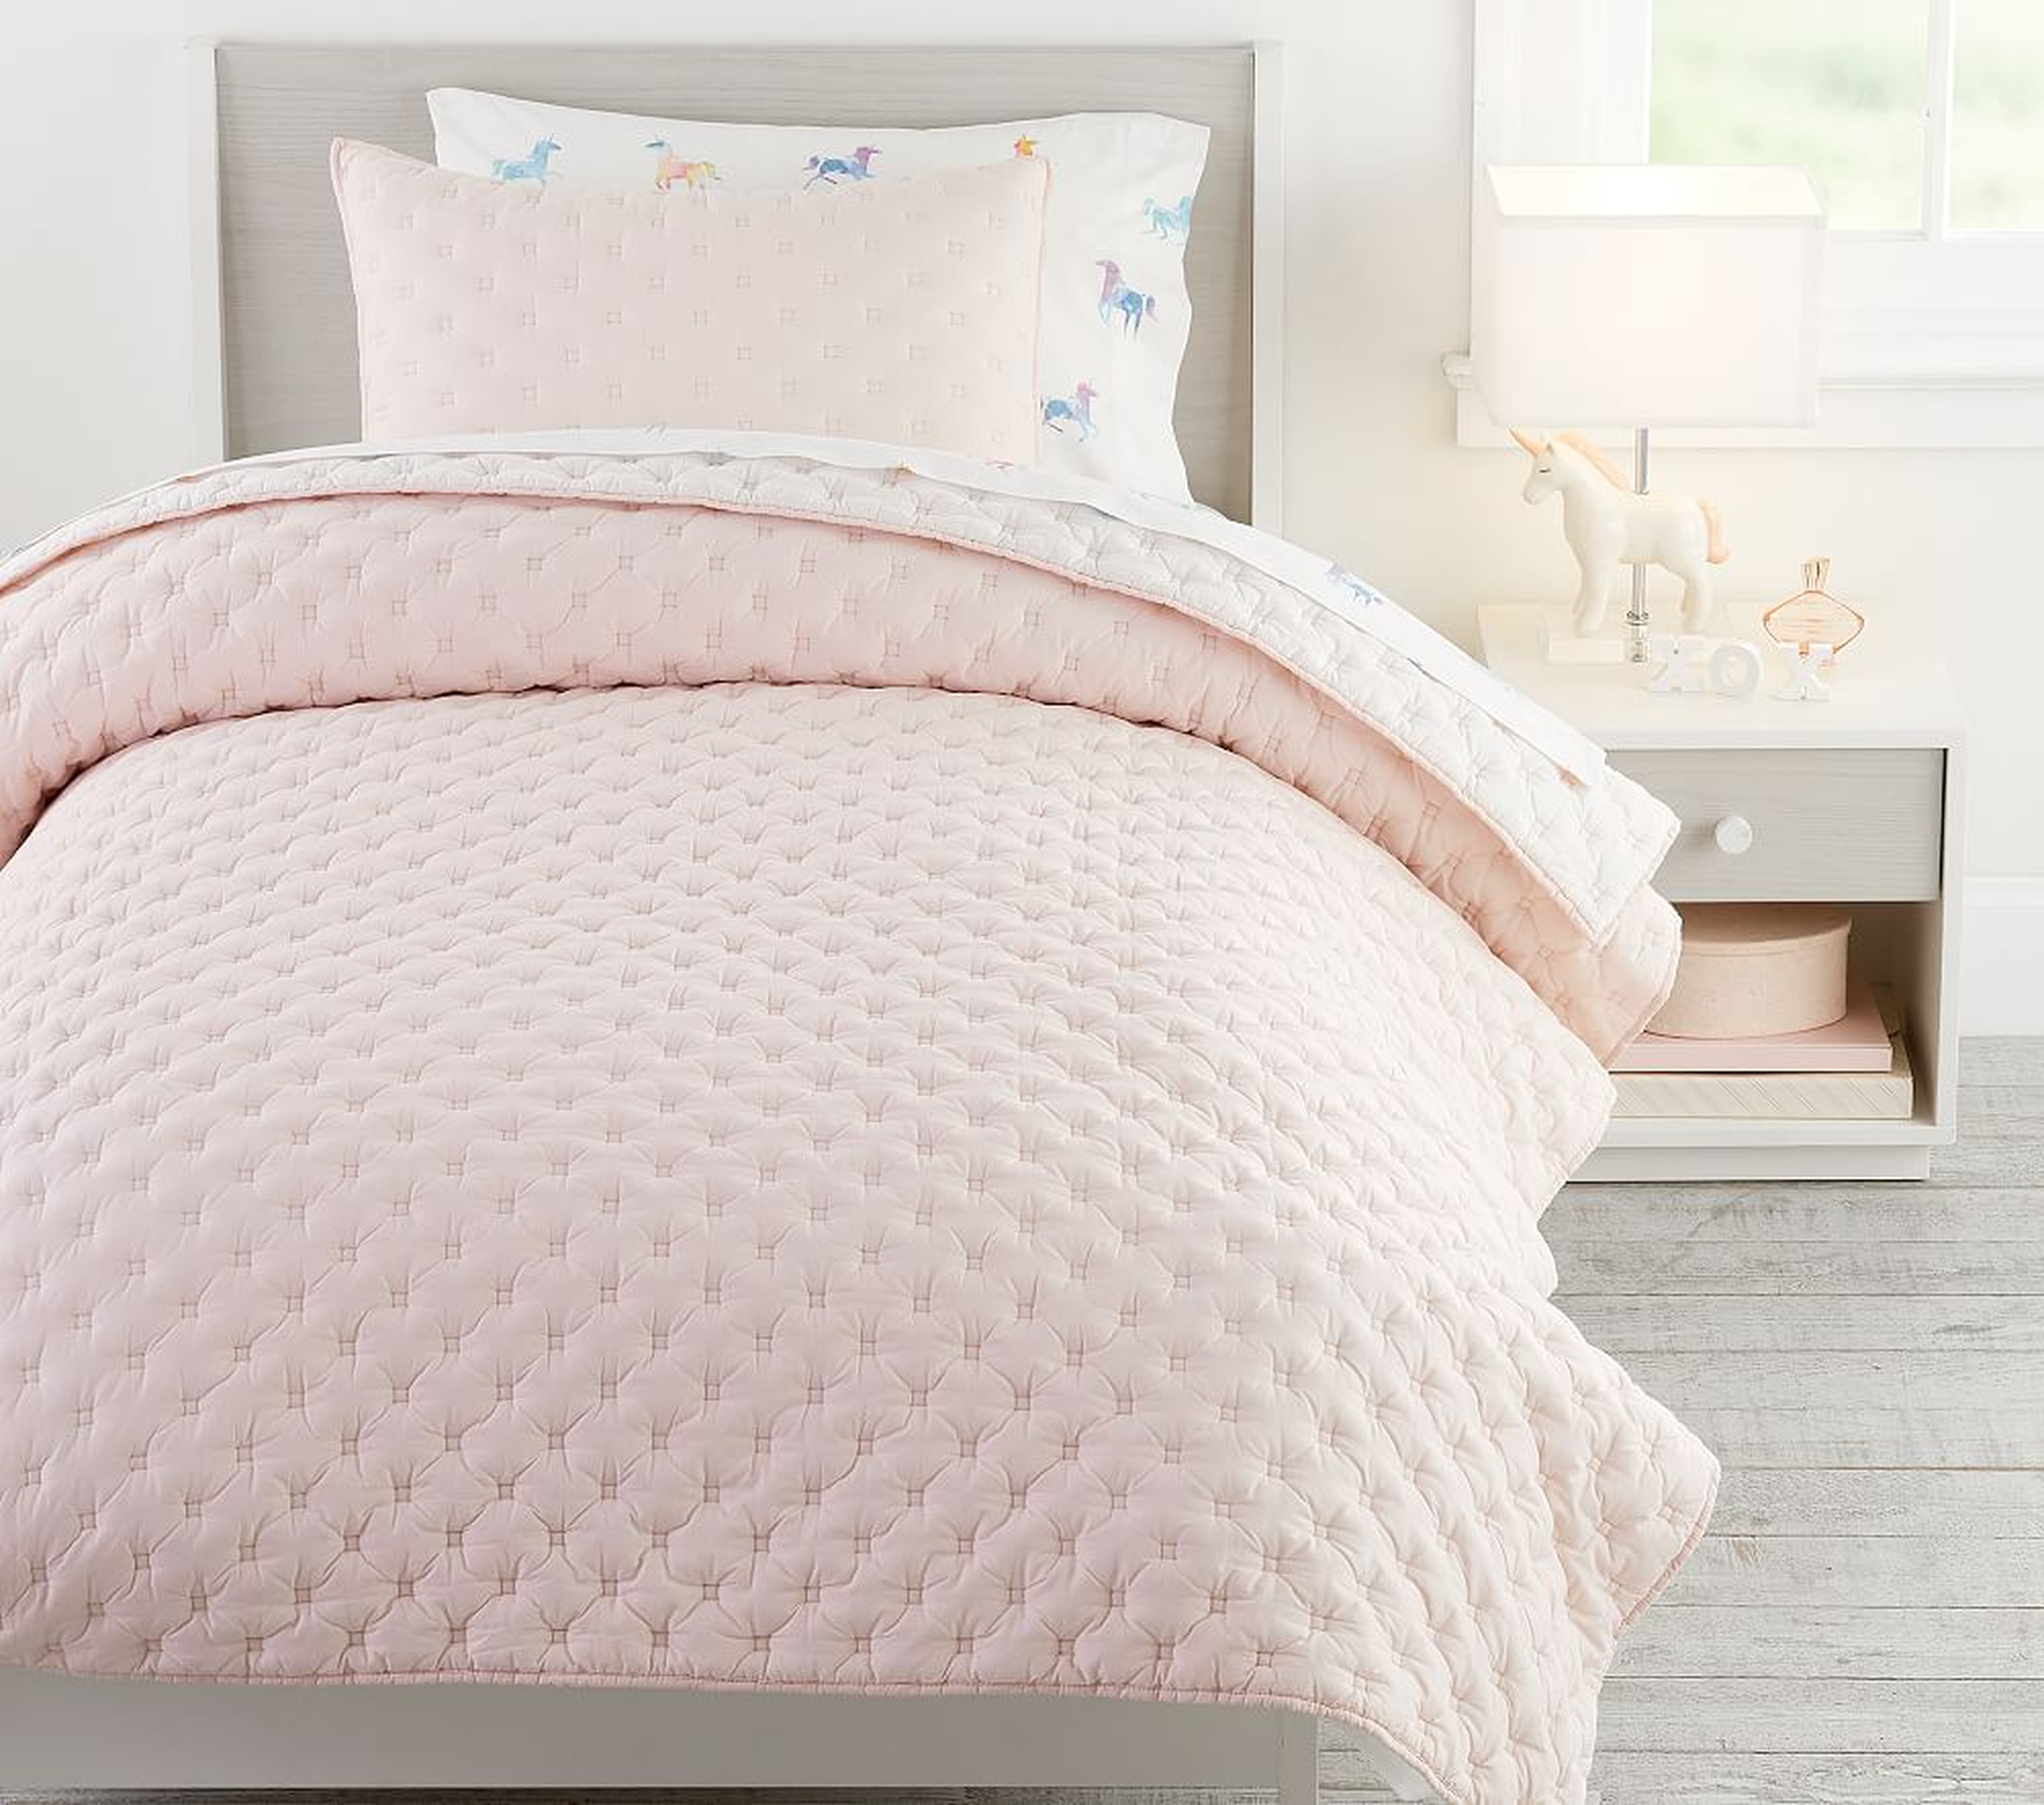 Blush Square Stitch Quilt Full/Queen Bedding Set - Pottery Barn Kids